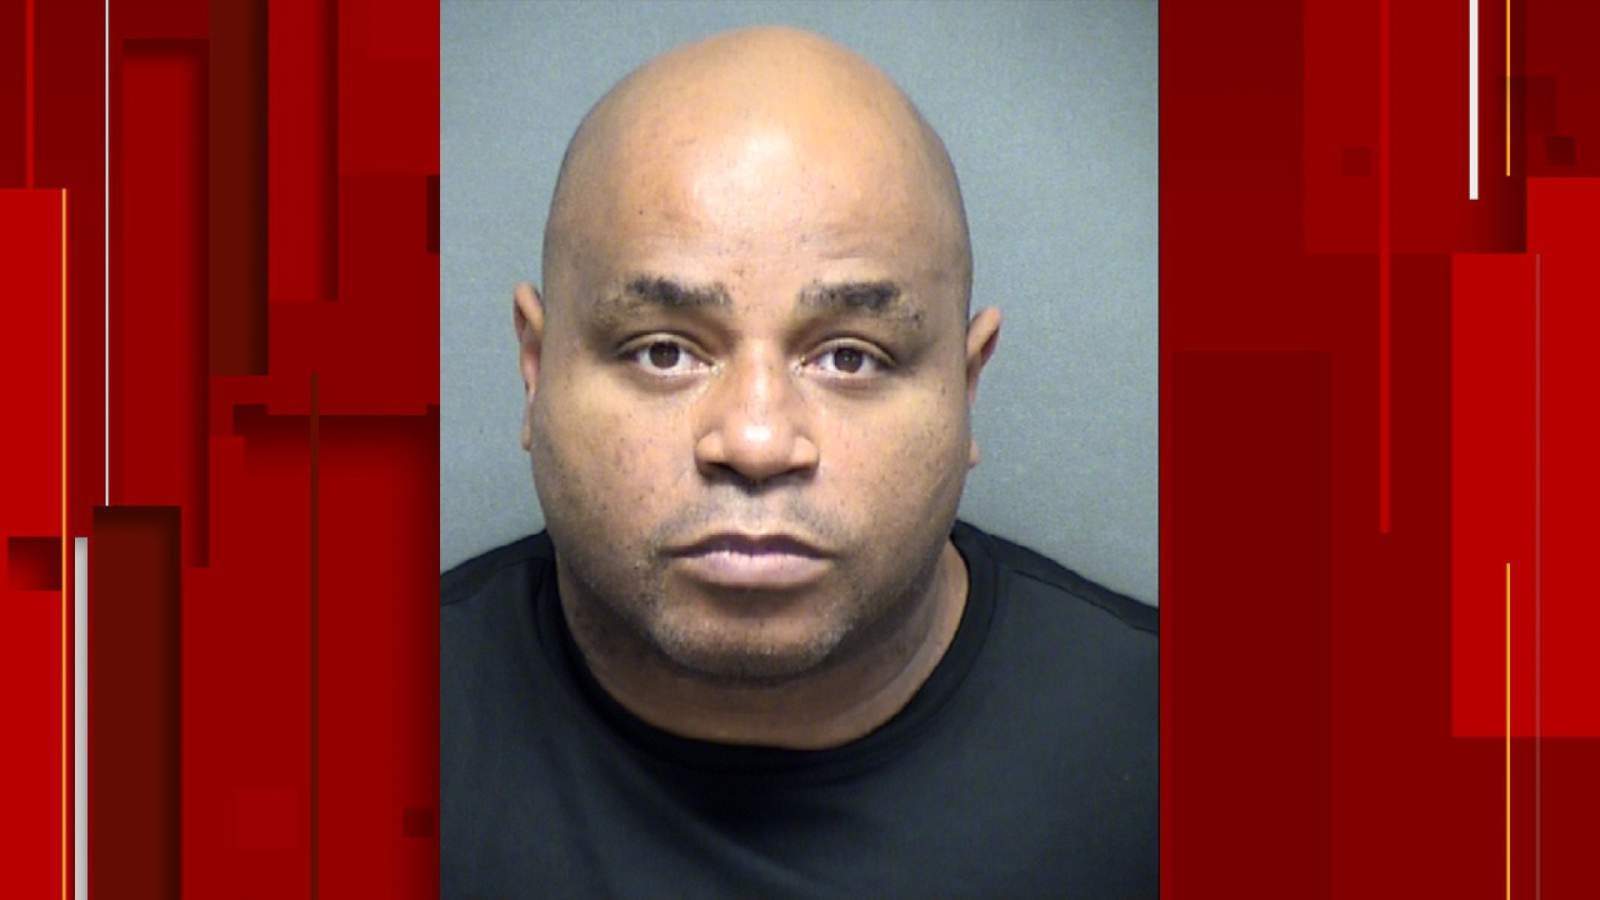 BCSO deputy arrested in connection with inmate’s suicide attempt at Bexar County Jail